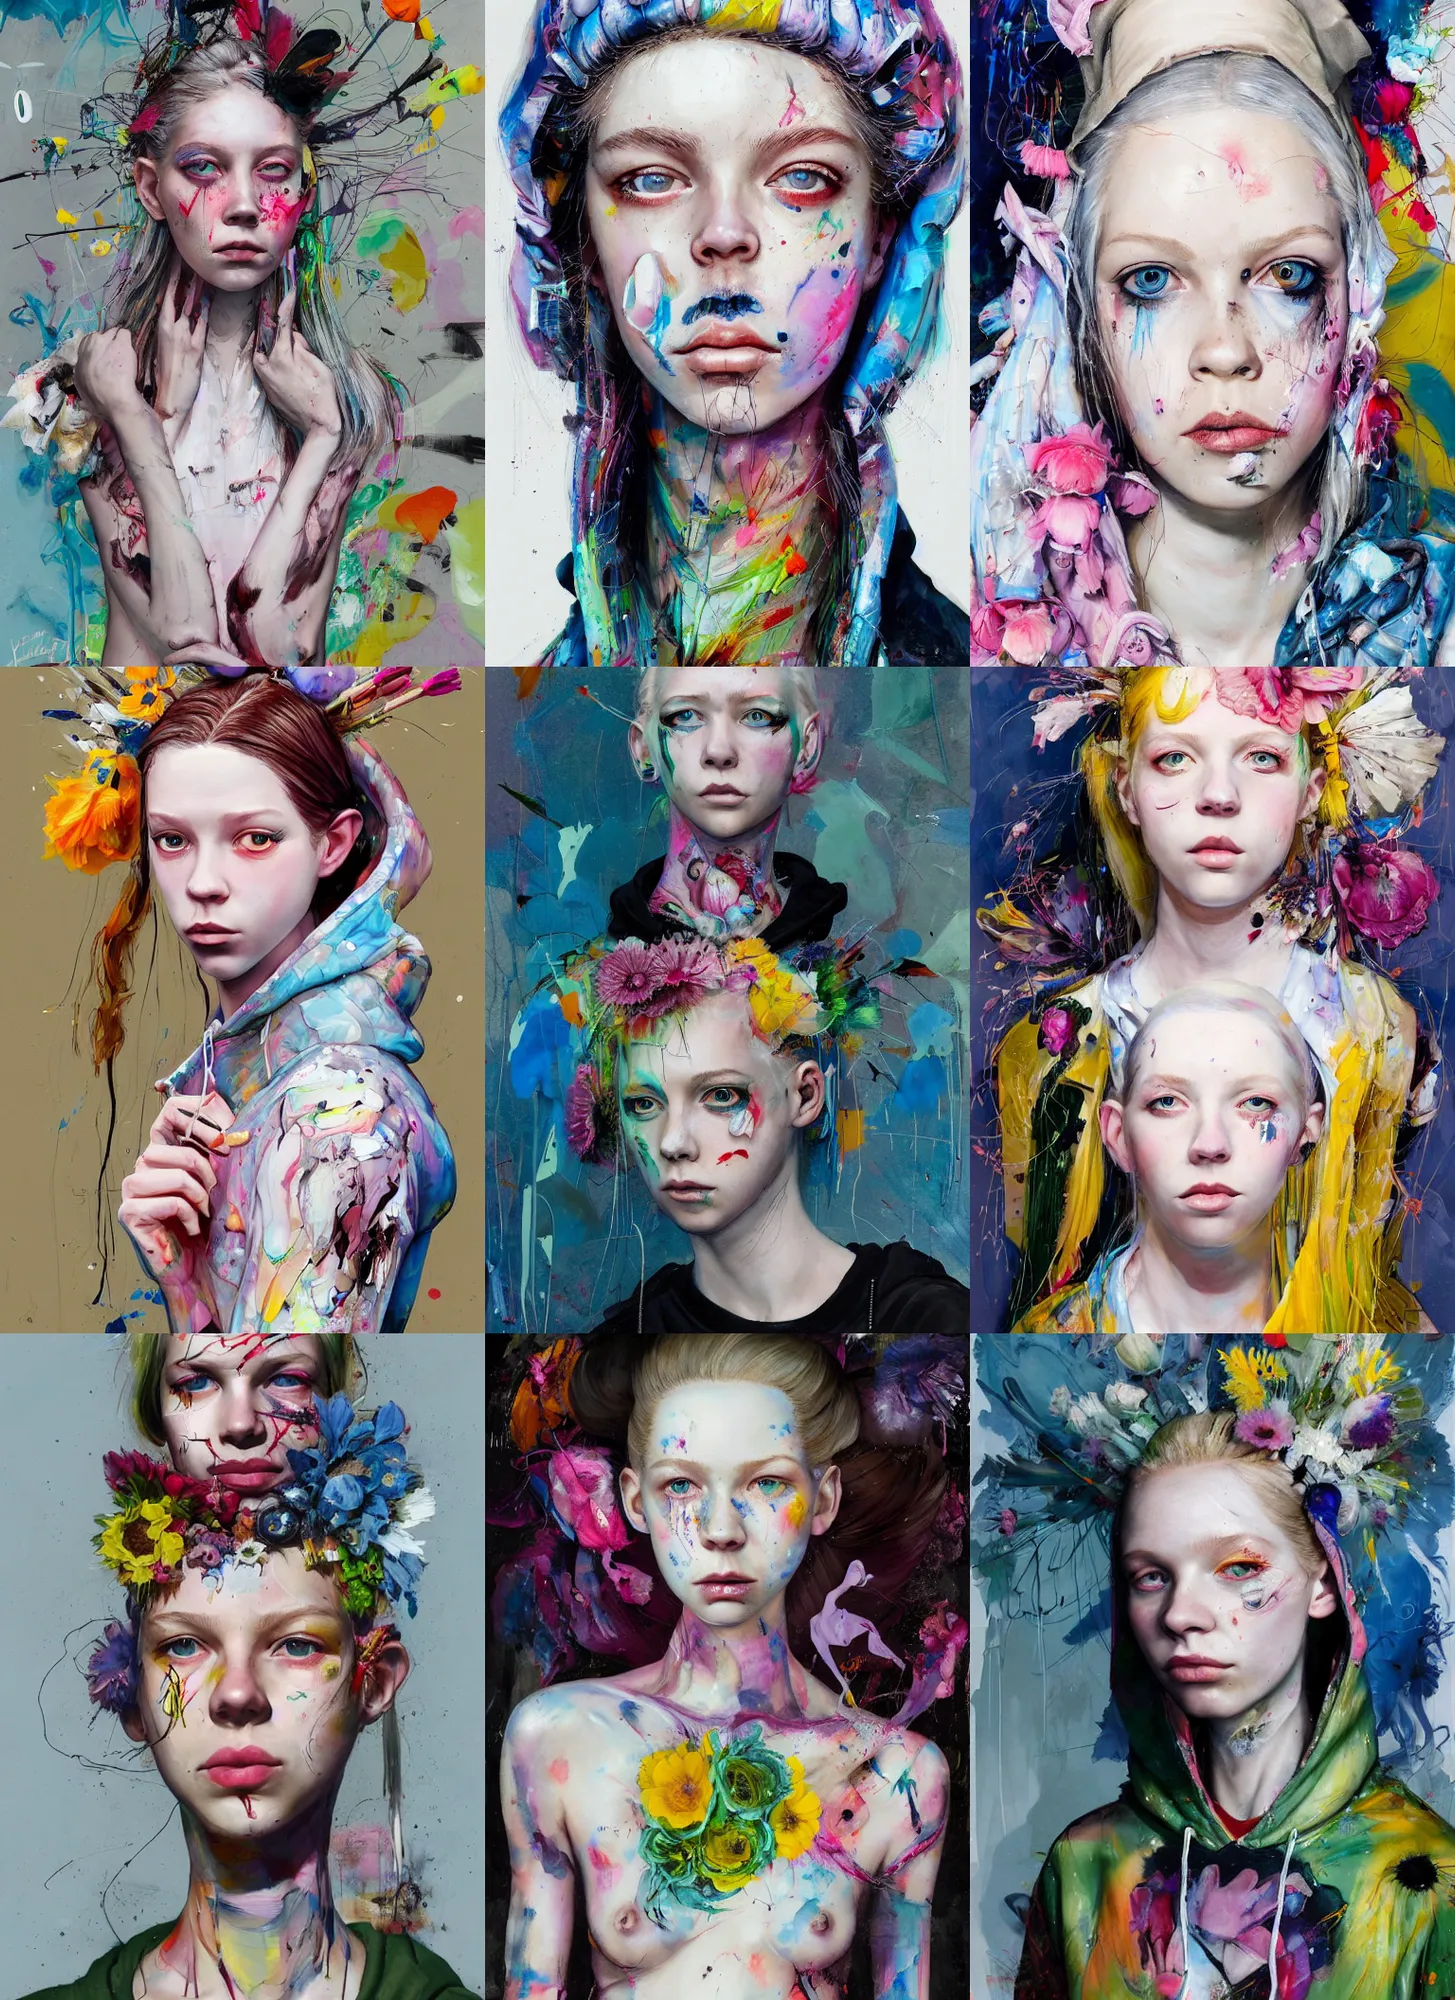 Prompt: 2 5 year old hunter schafer in the style of martine johanna and! jenny saville!, wearing a hoodie, standing in a township street, street fashion outfit, haute couture fashion shoot, mascara, full figure painting by john berkey, david choe, ismail inceoglu, decorative flowers, 2 4 mm, die antwoord yolandi visser